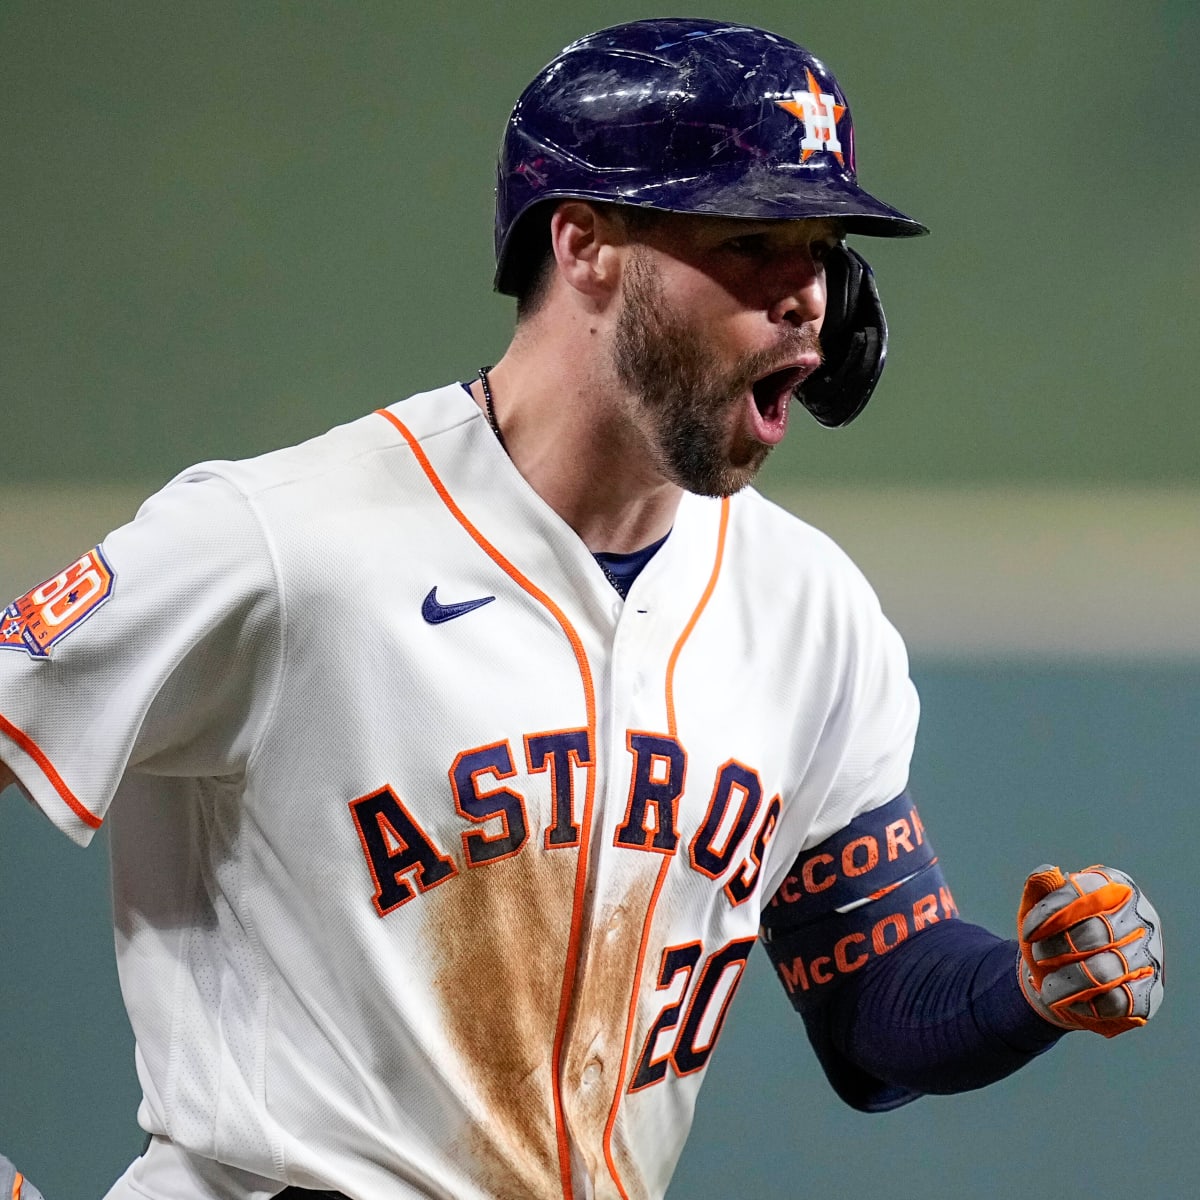 Chas McCormick Player Props: Astros vs. Angels